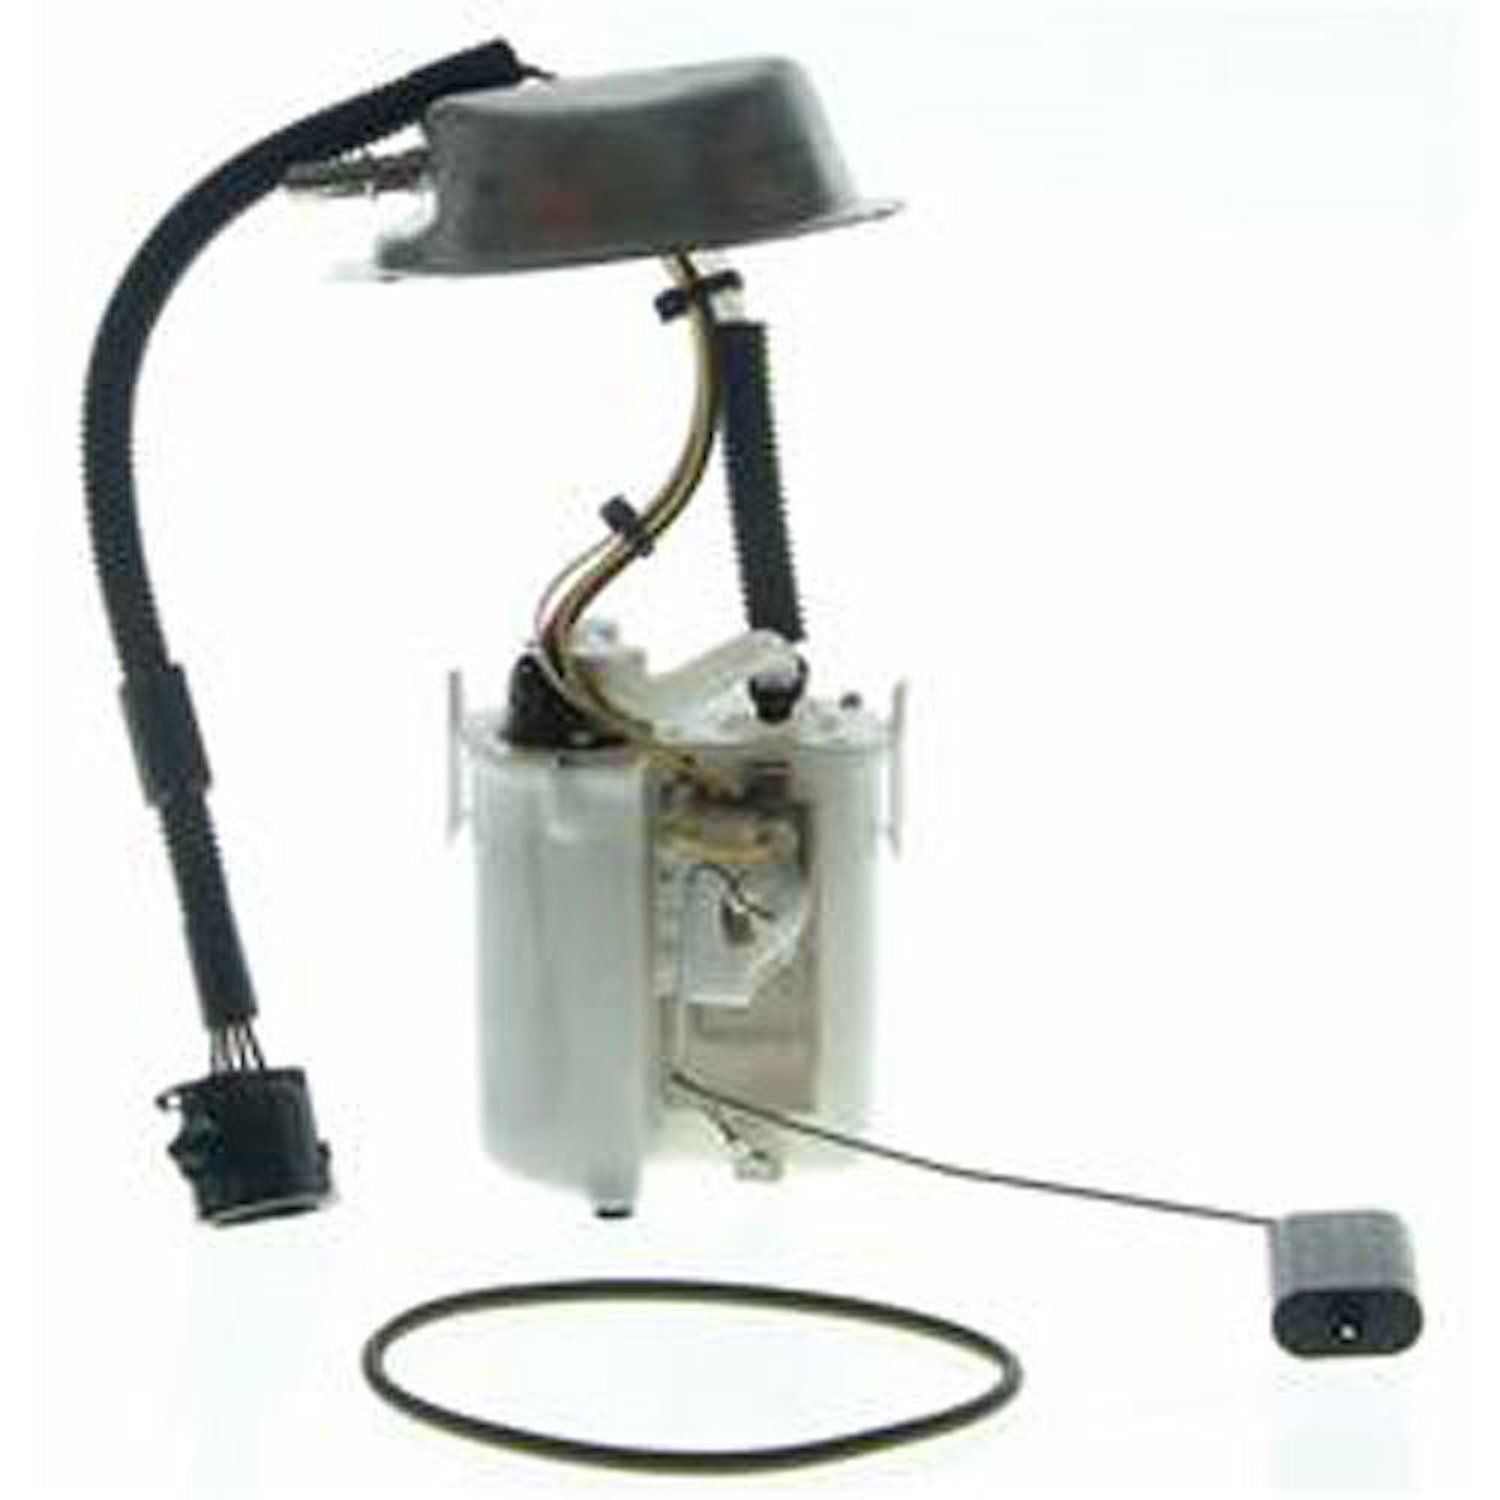 OE Ford Replacement Electric Fuel Pump Module Assembly 2003-04 Ford Focus 2.3L 4 Cyl